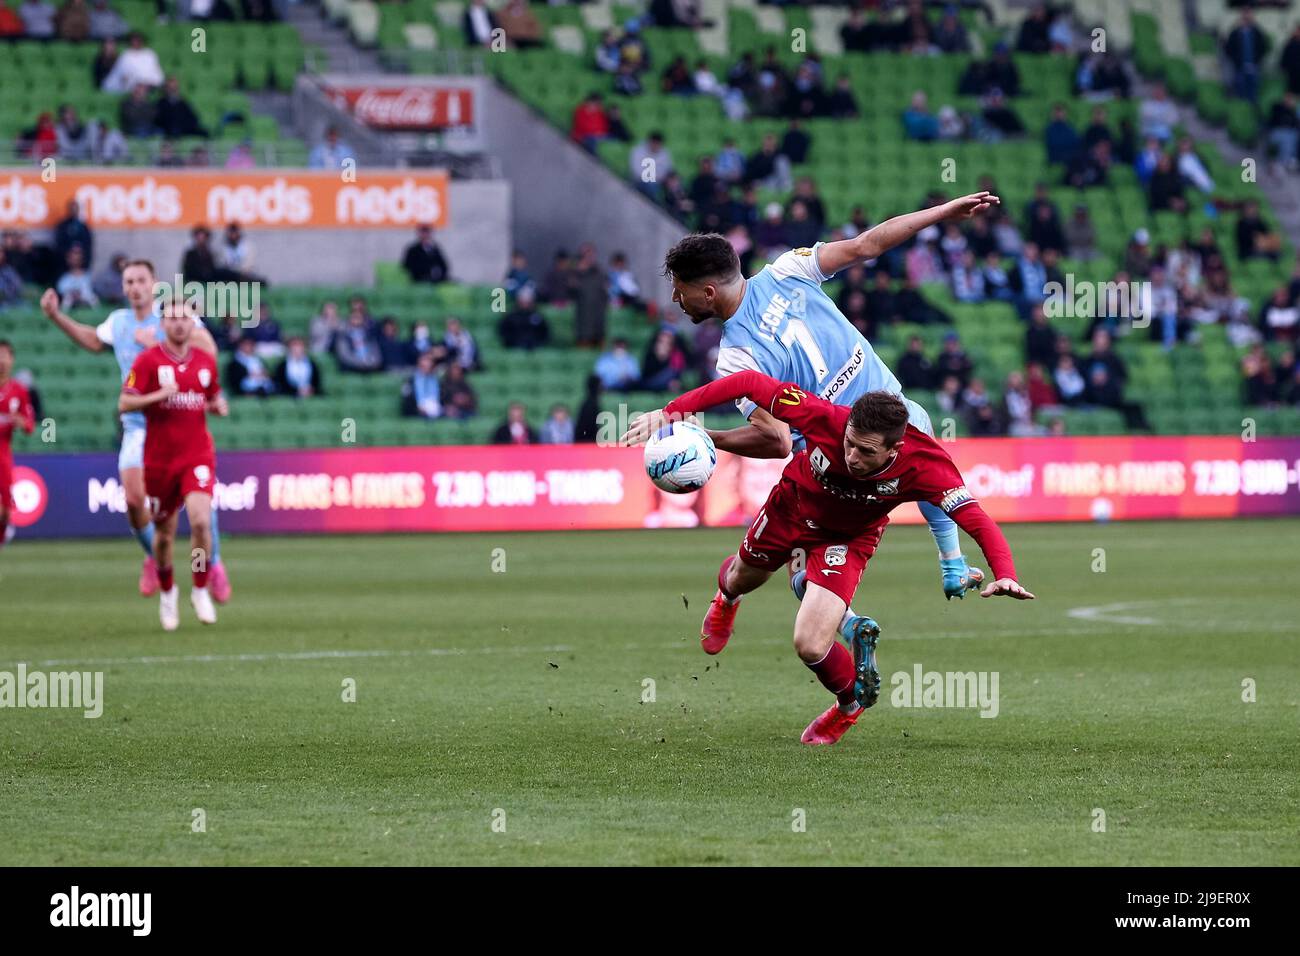 Melbourne, Australia, 22 May, 2022. Mathew Leckie of Melbourne City FC heads the ball during the A-League Semi Final soccer match between Melbourne City FC and Adelaide United at AAMI Park on May 22, 2022 in Melbourne, Australia. Credit: Dave Hewison/Speed Media/Alamy Live News Stock Photo